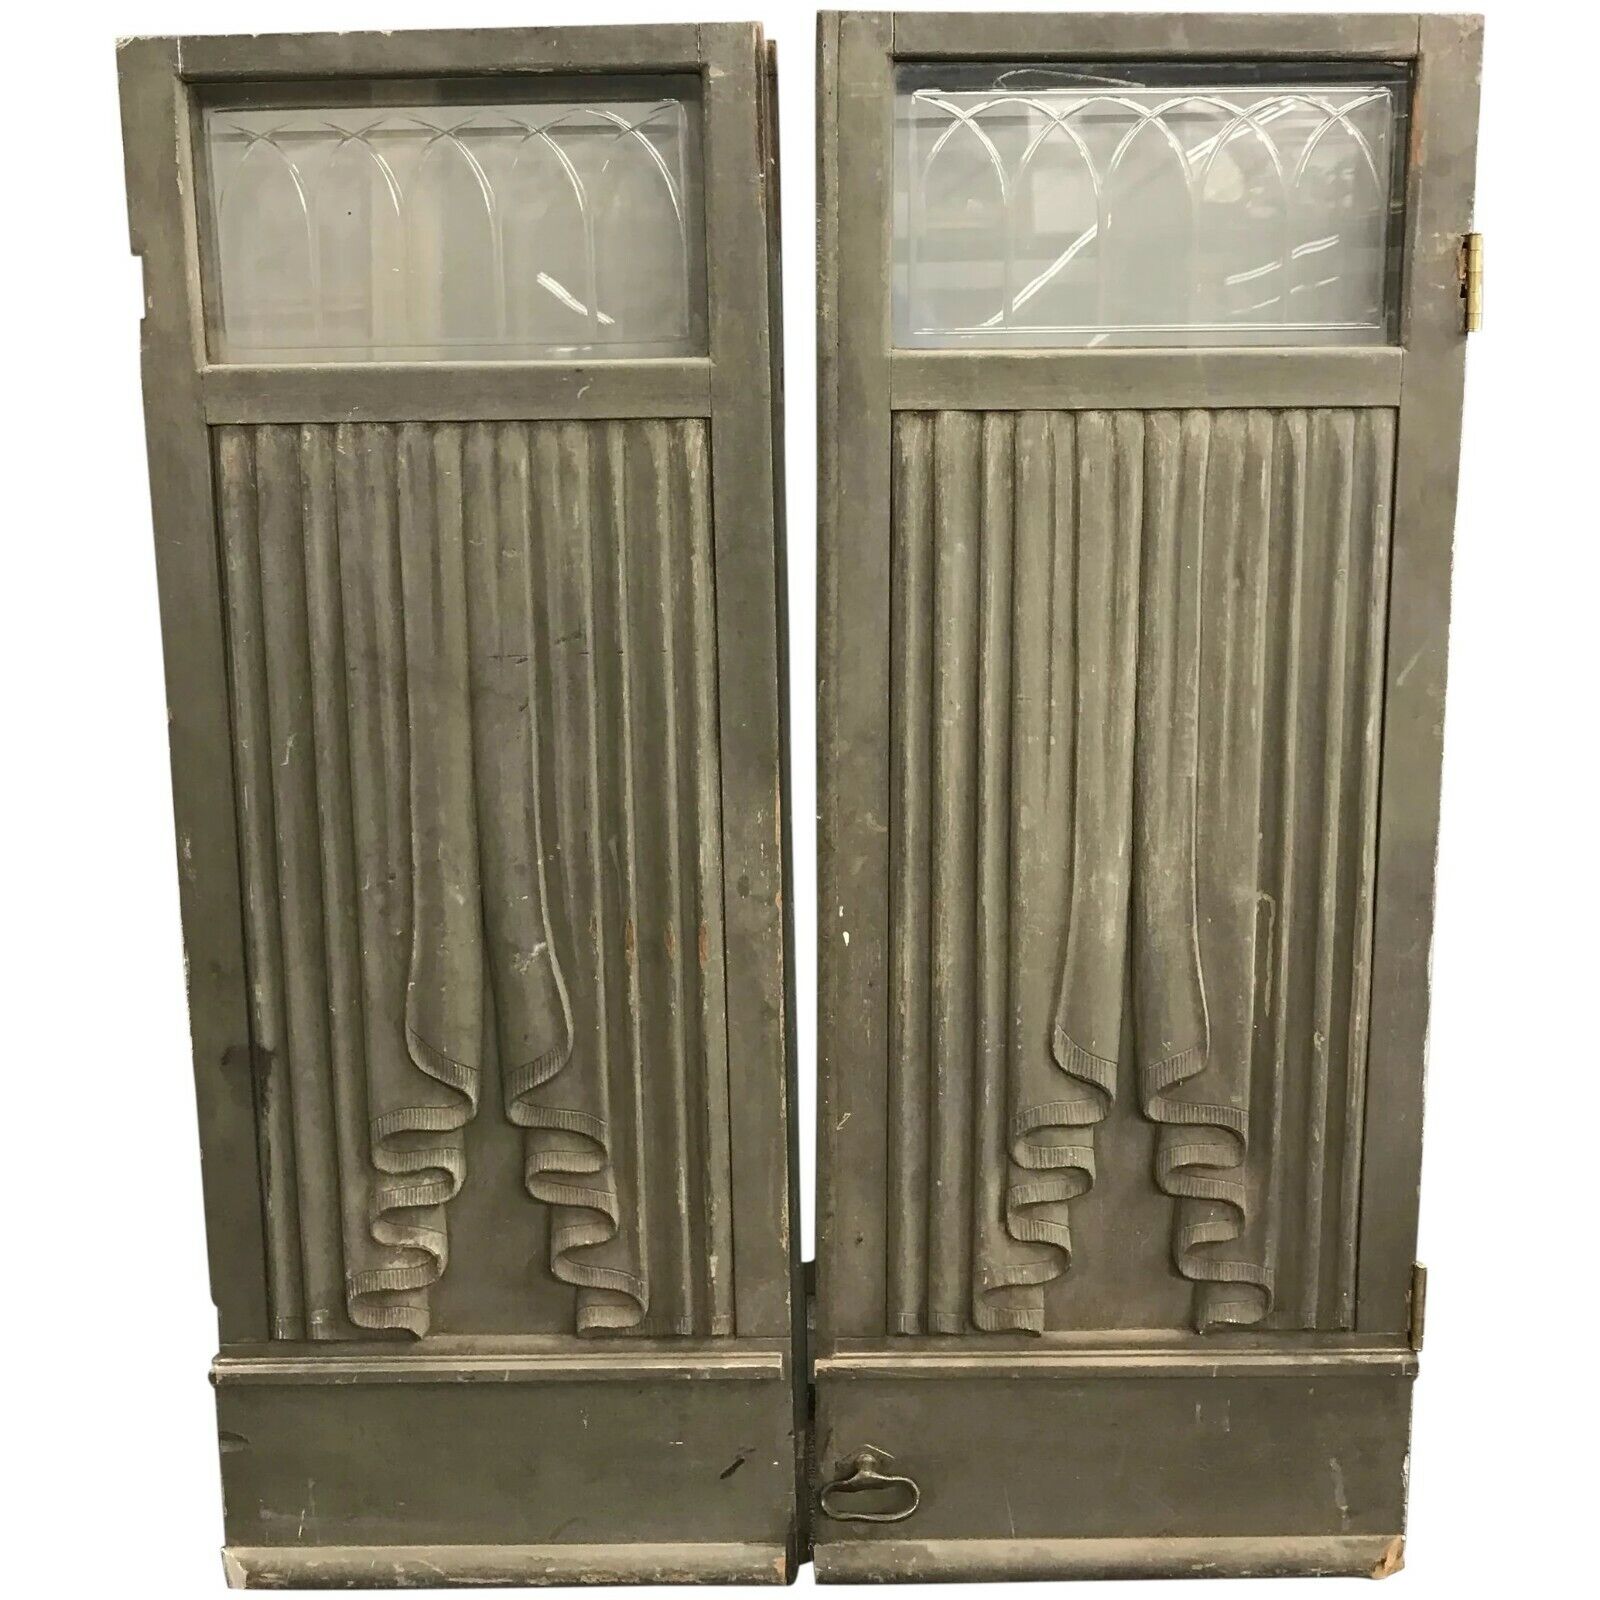 Pair Of Early 20th C Wooden Hearse Or Funeral Carriage Doors With Glass Transoms